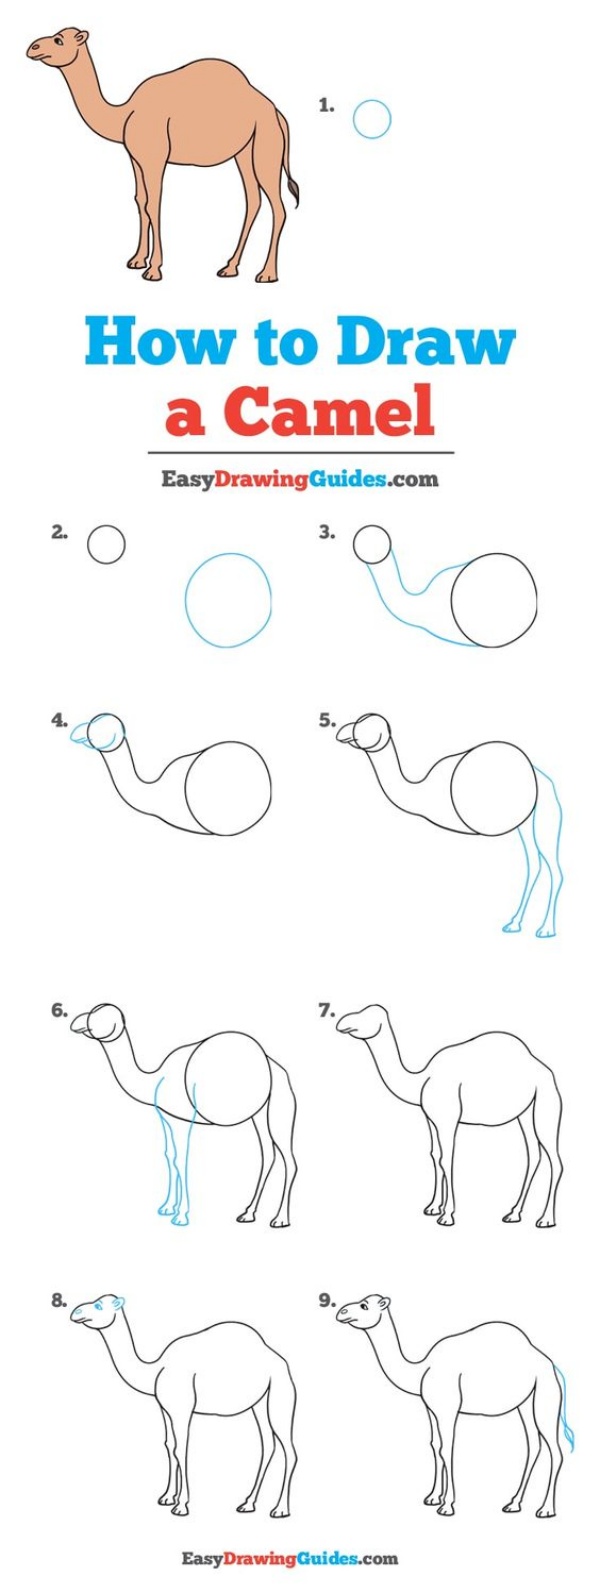 How to Draw a Camel Step by Step